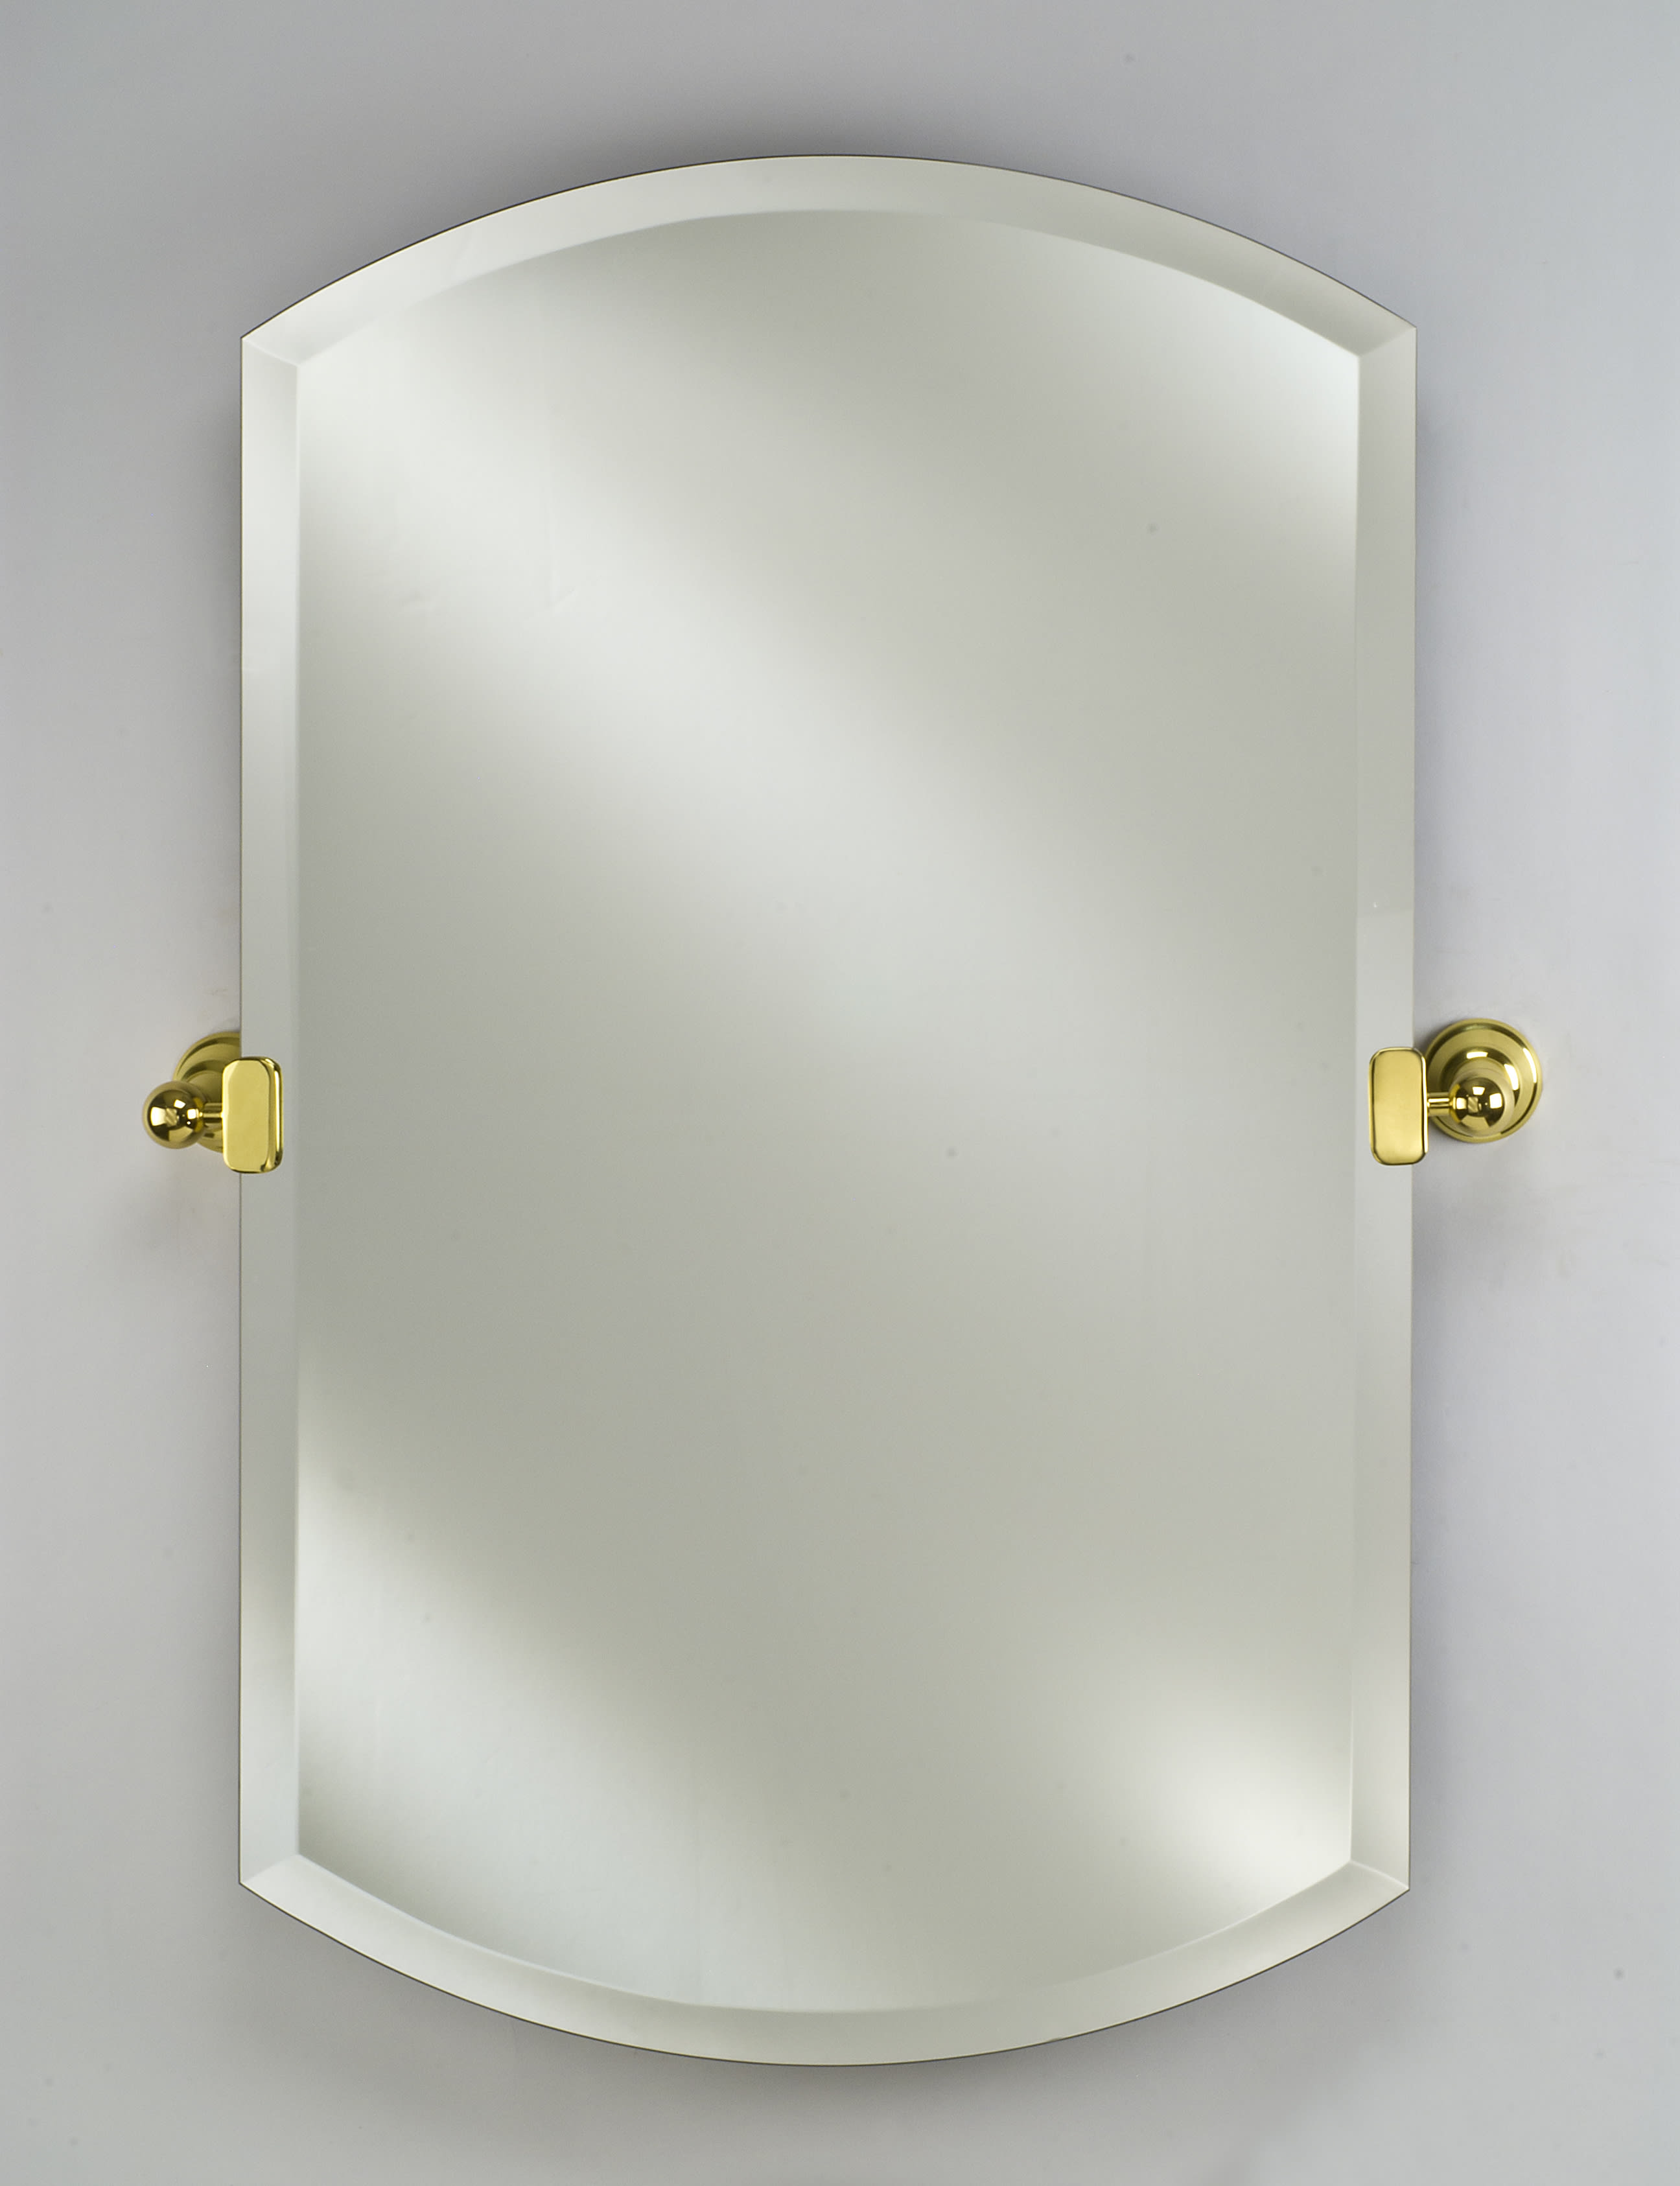 Afina RM-926-T Radiance Double Arch Frameless Wall Mirror with Decorative  Tilt Mounting Brackets